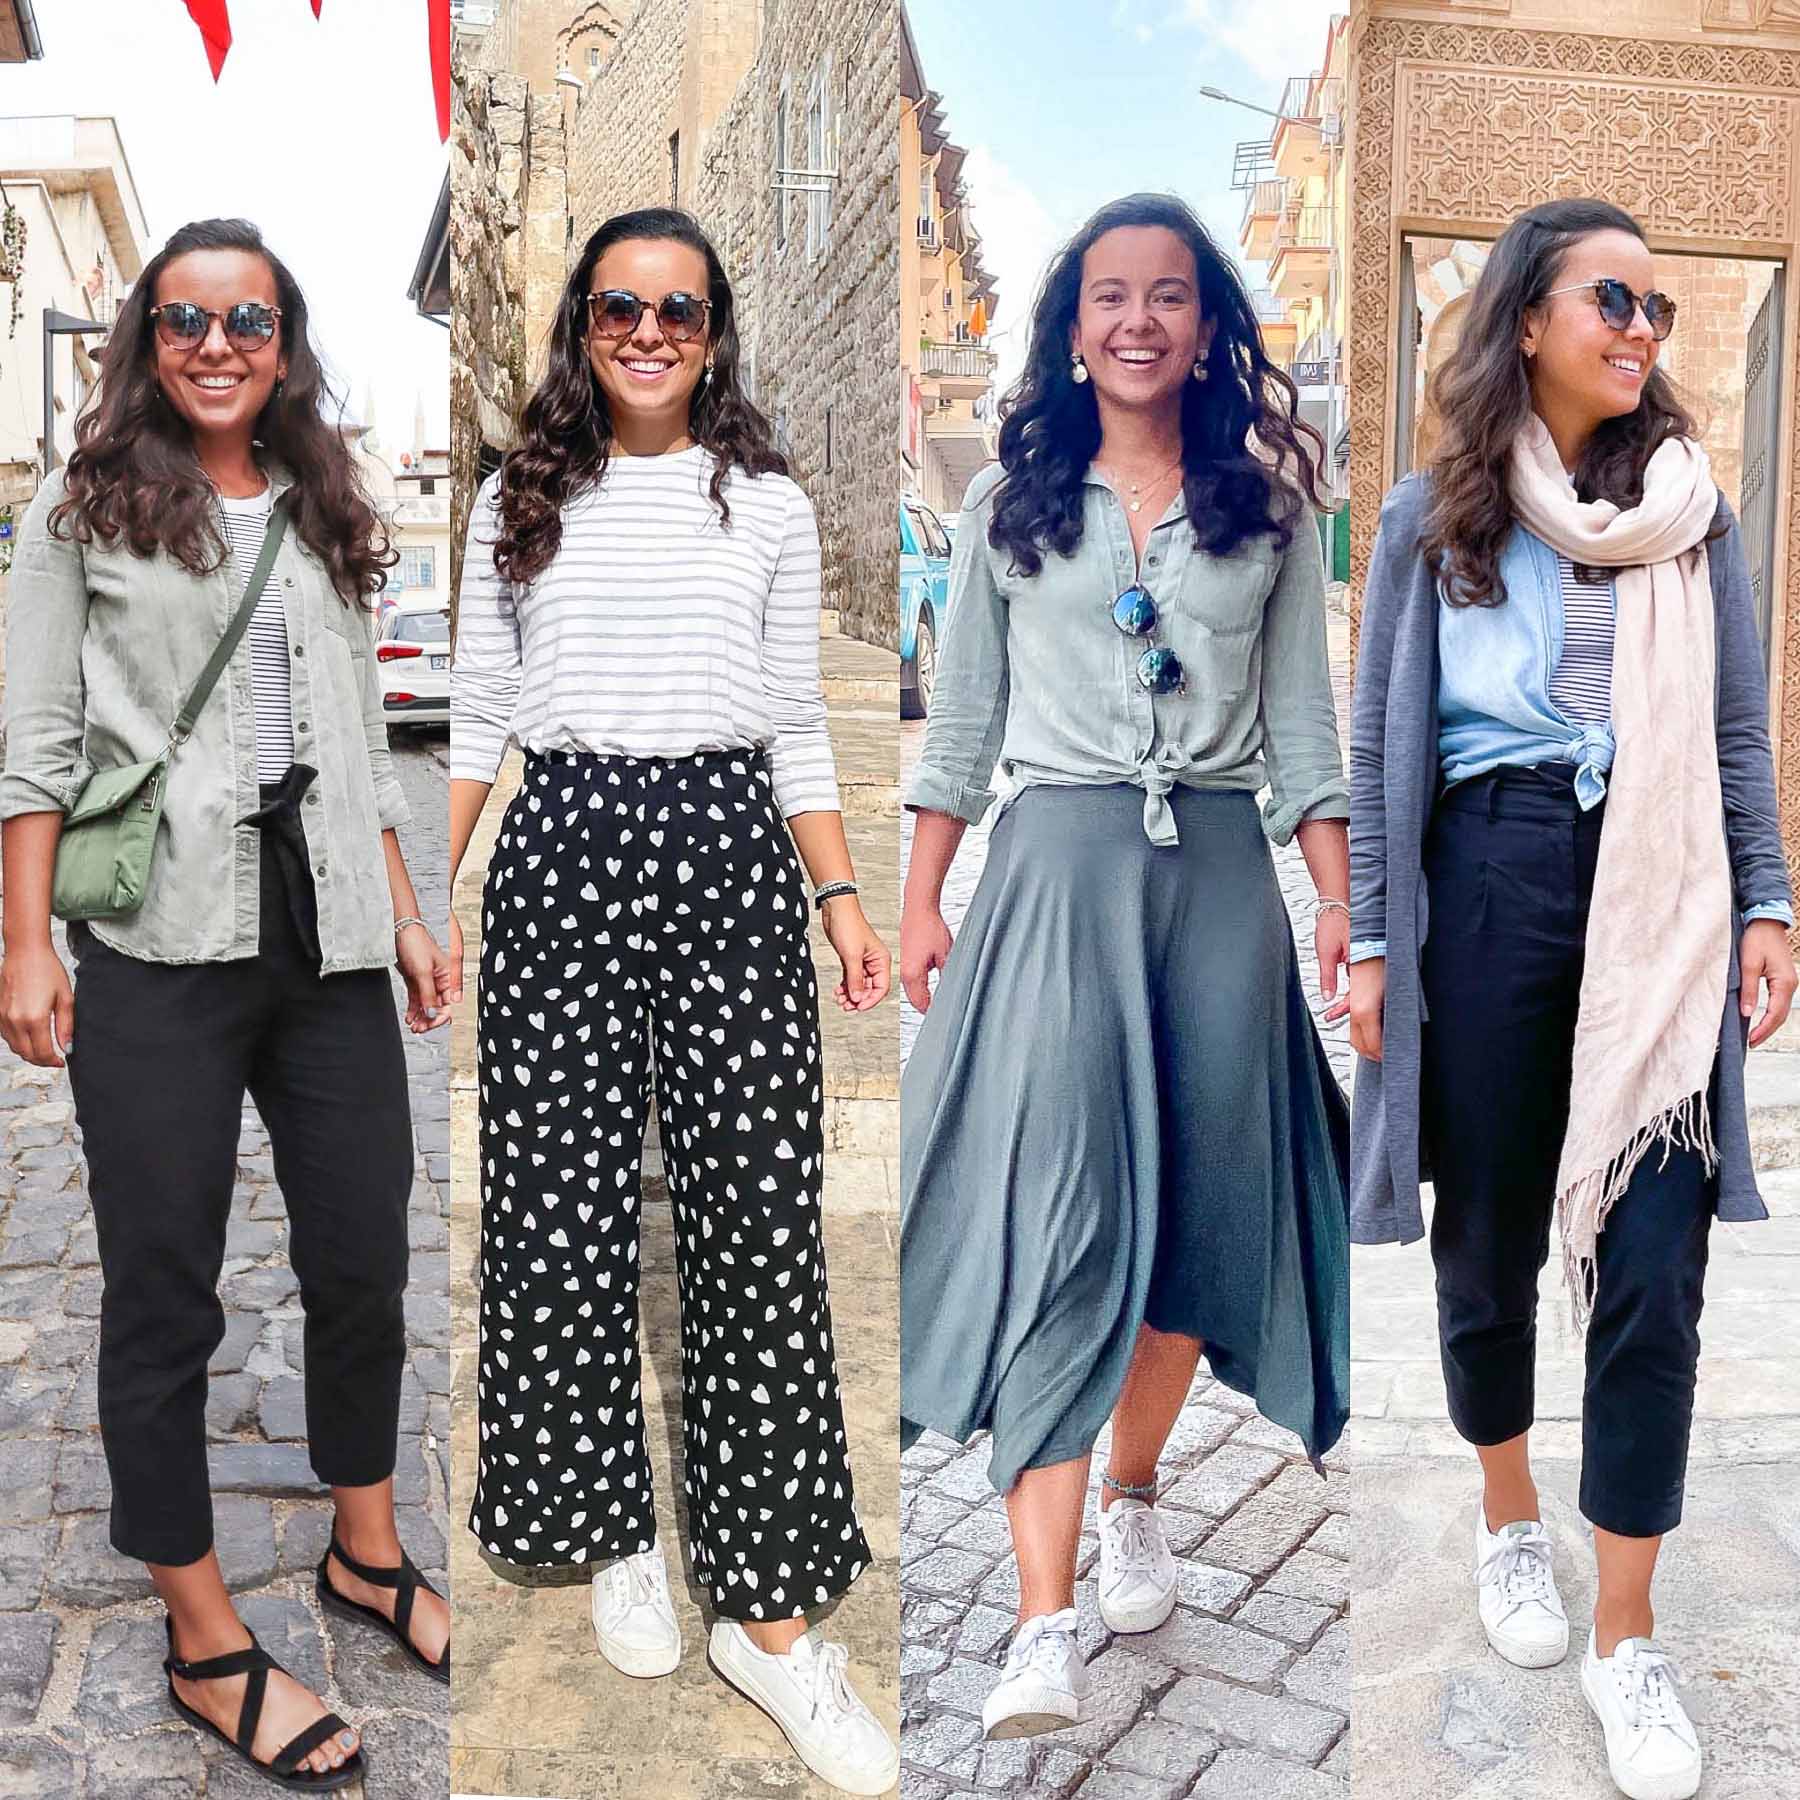 From Matching Two-Piece Fits to Travel Outfit Ideas: The Latest